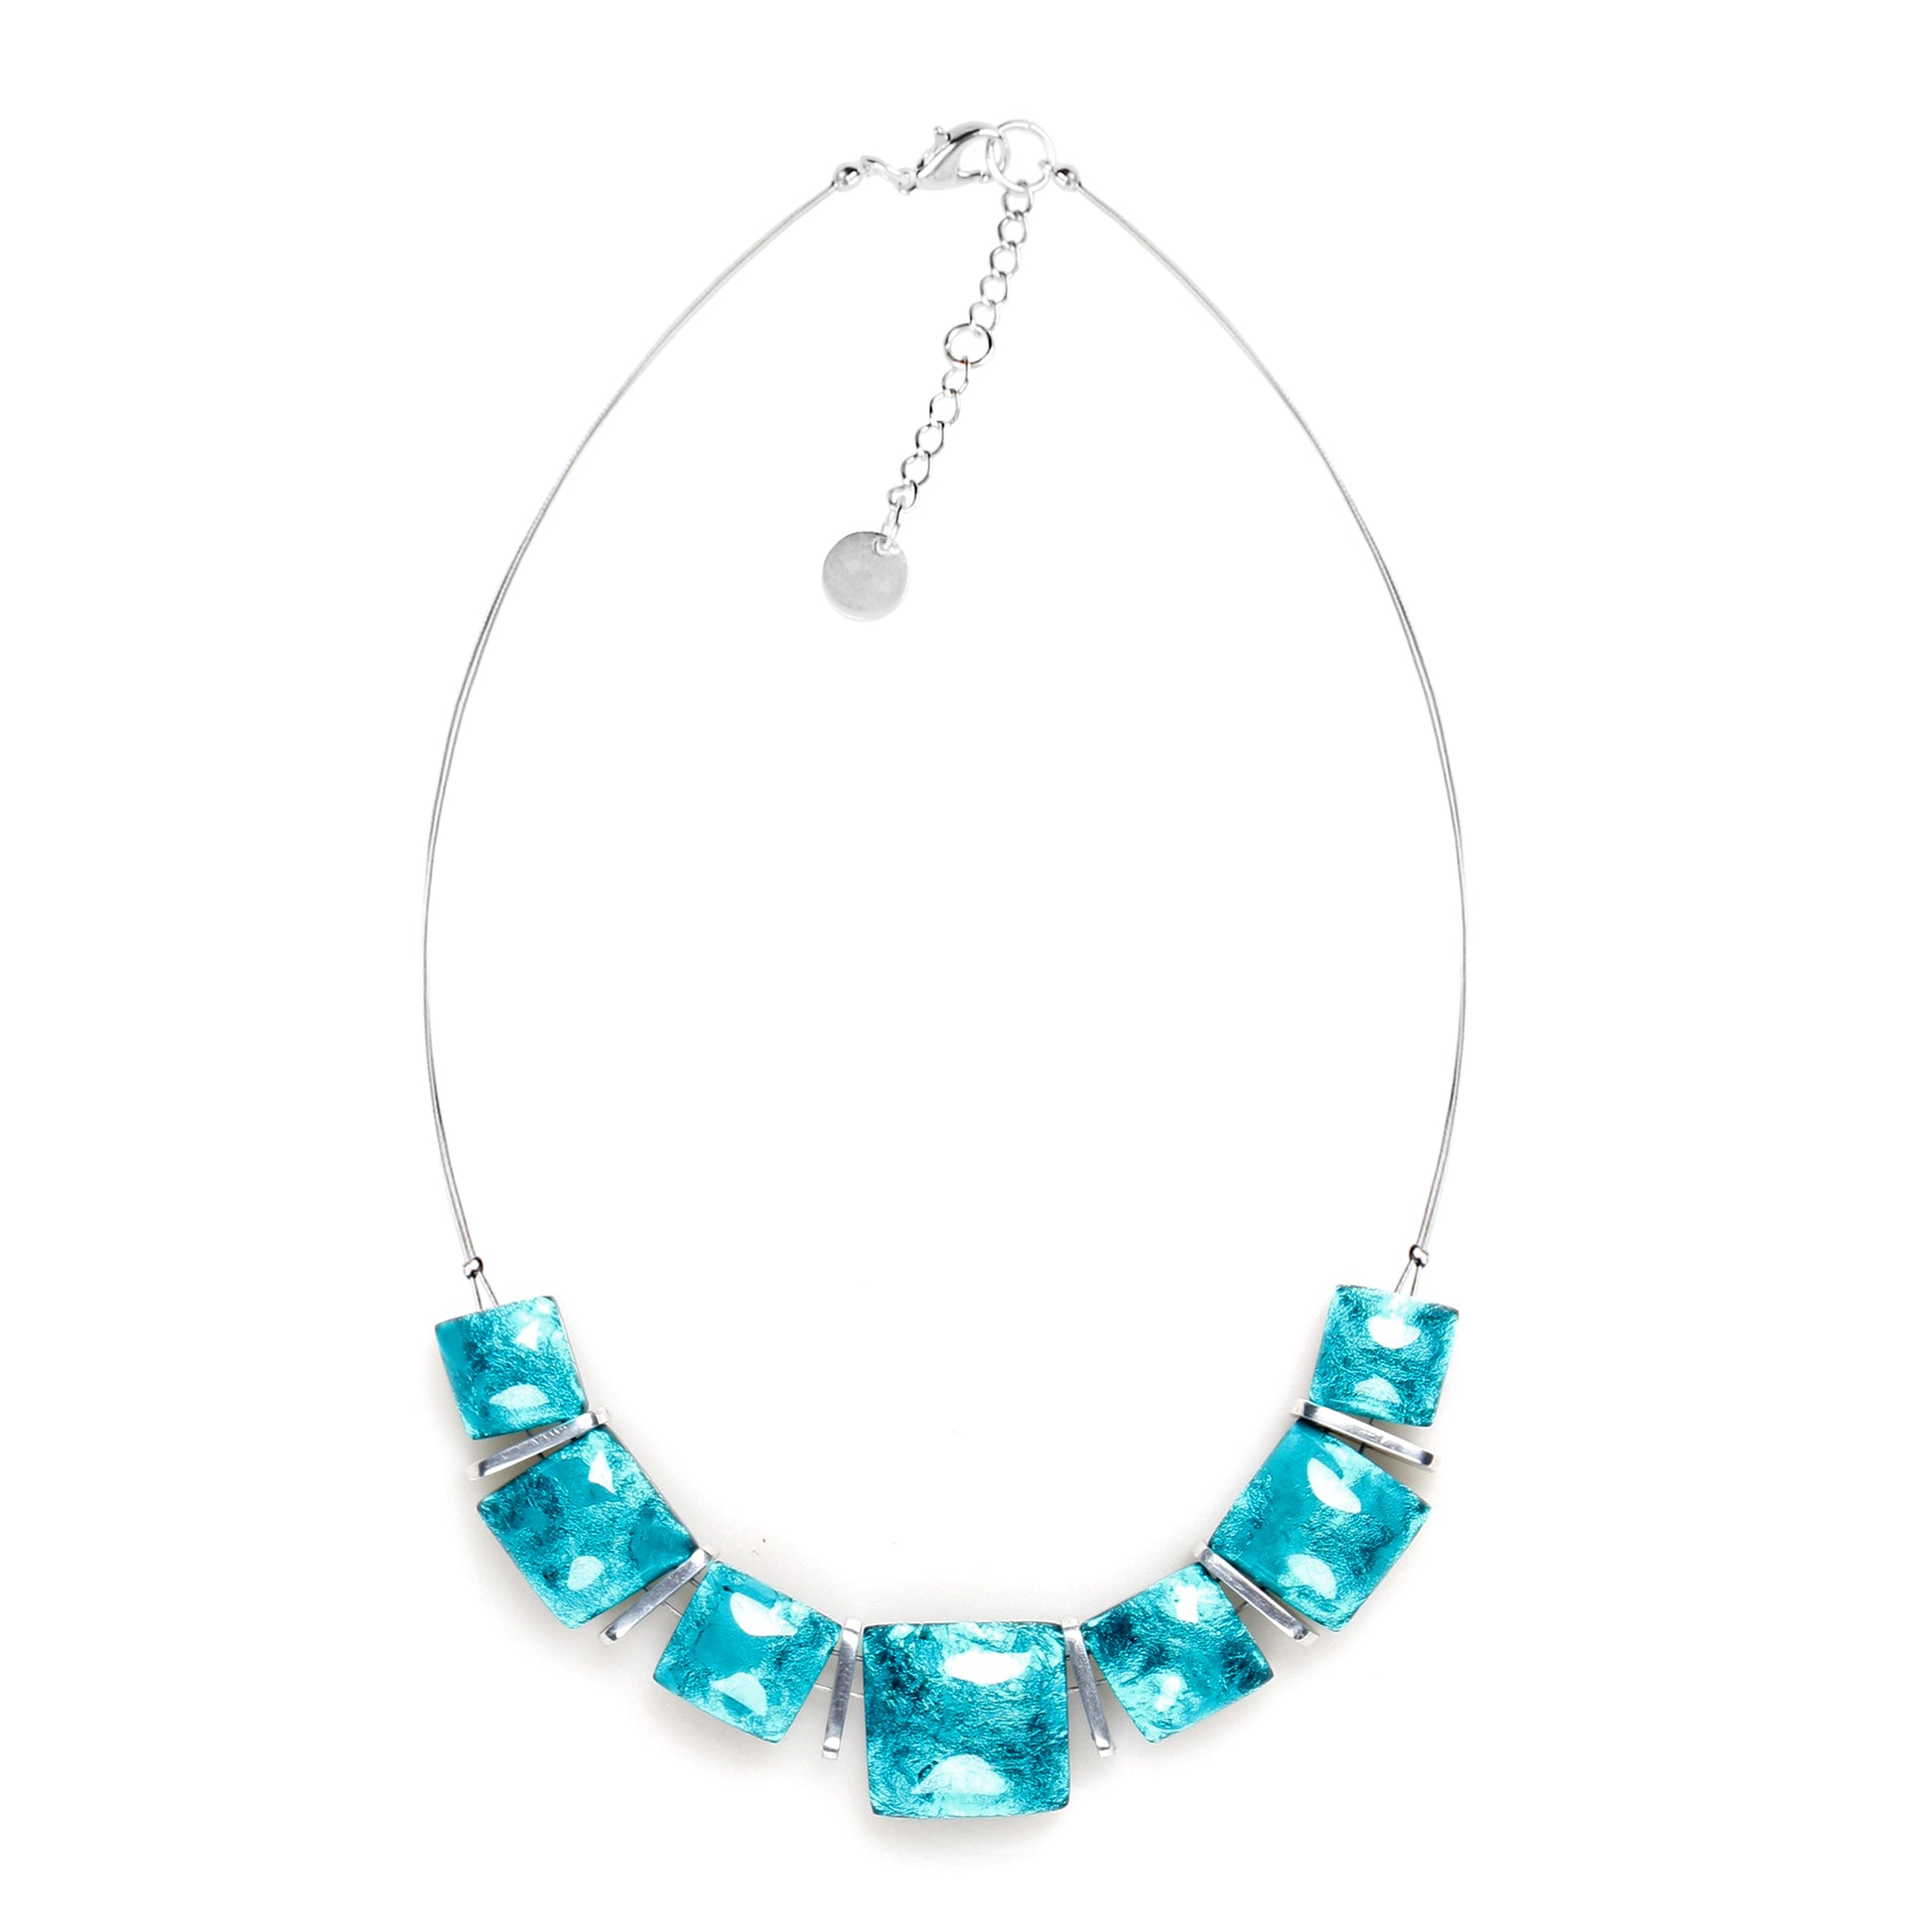 Teal Antique Square Shiny Necklace